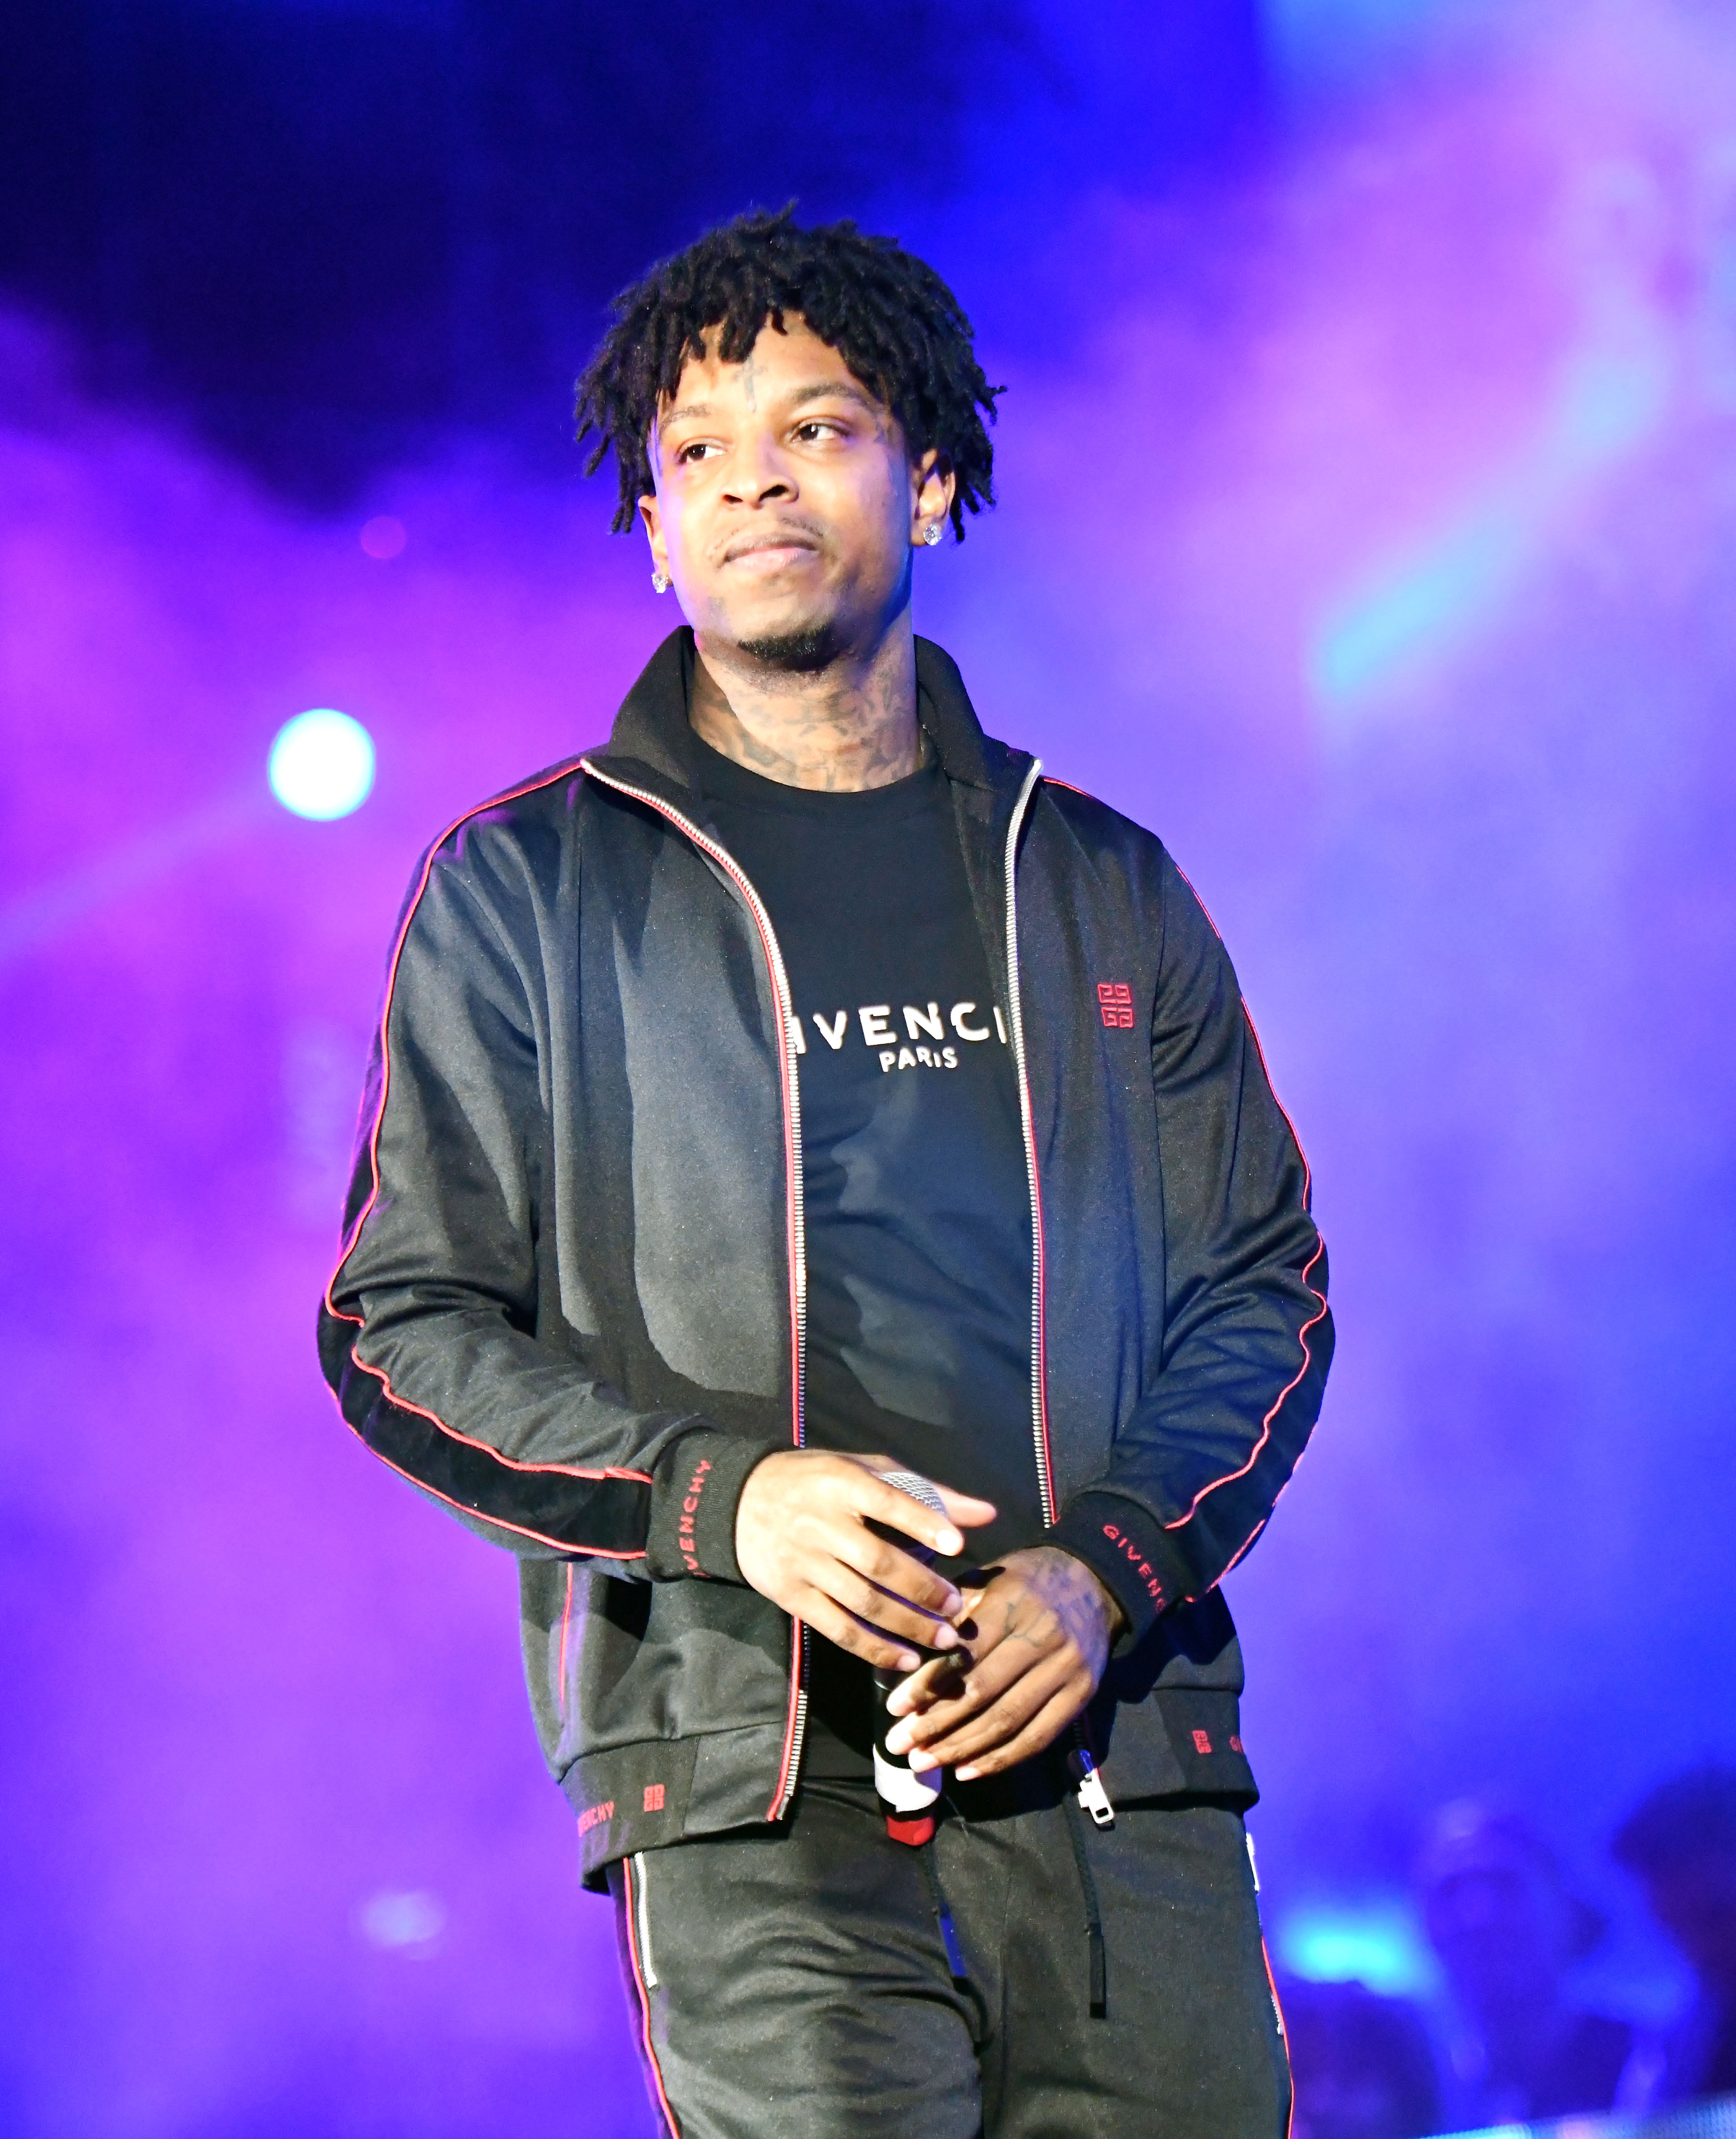 21 Savage Announces UK Visit After Becoming Permanent US Resident